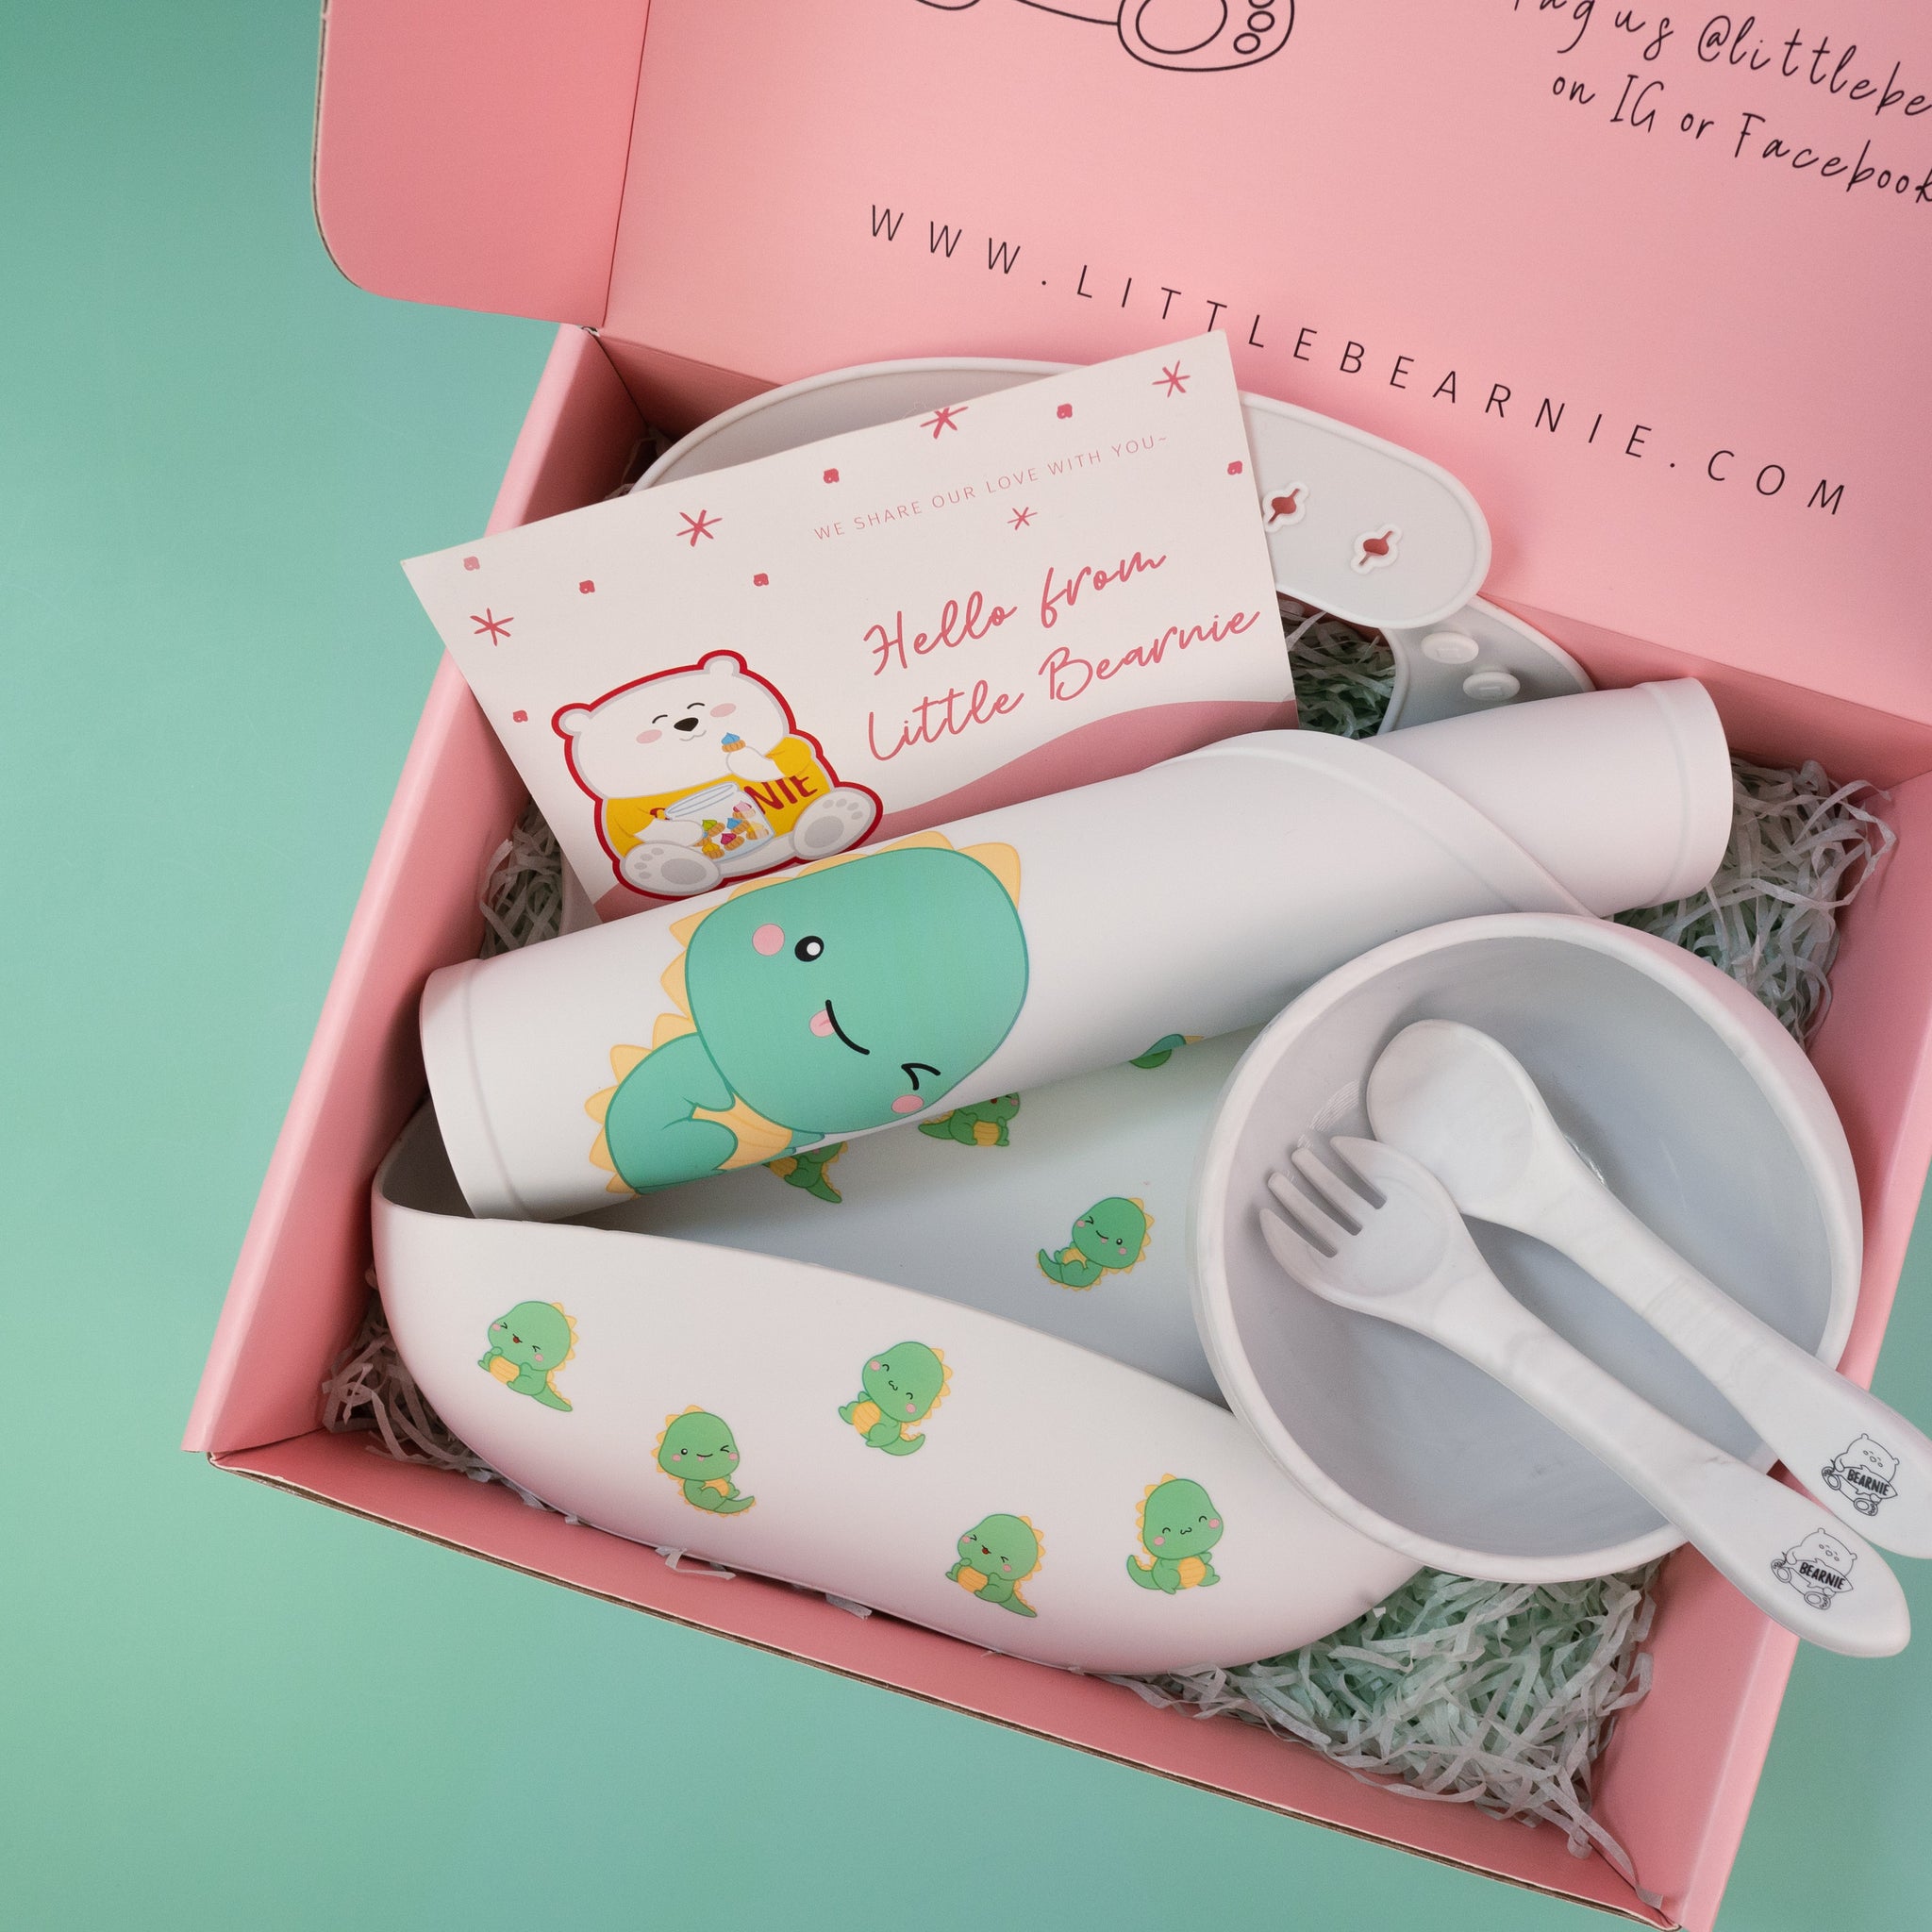 Practical and Adorable Gifts For a Little One's Big Day!